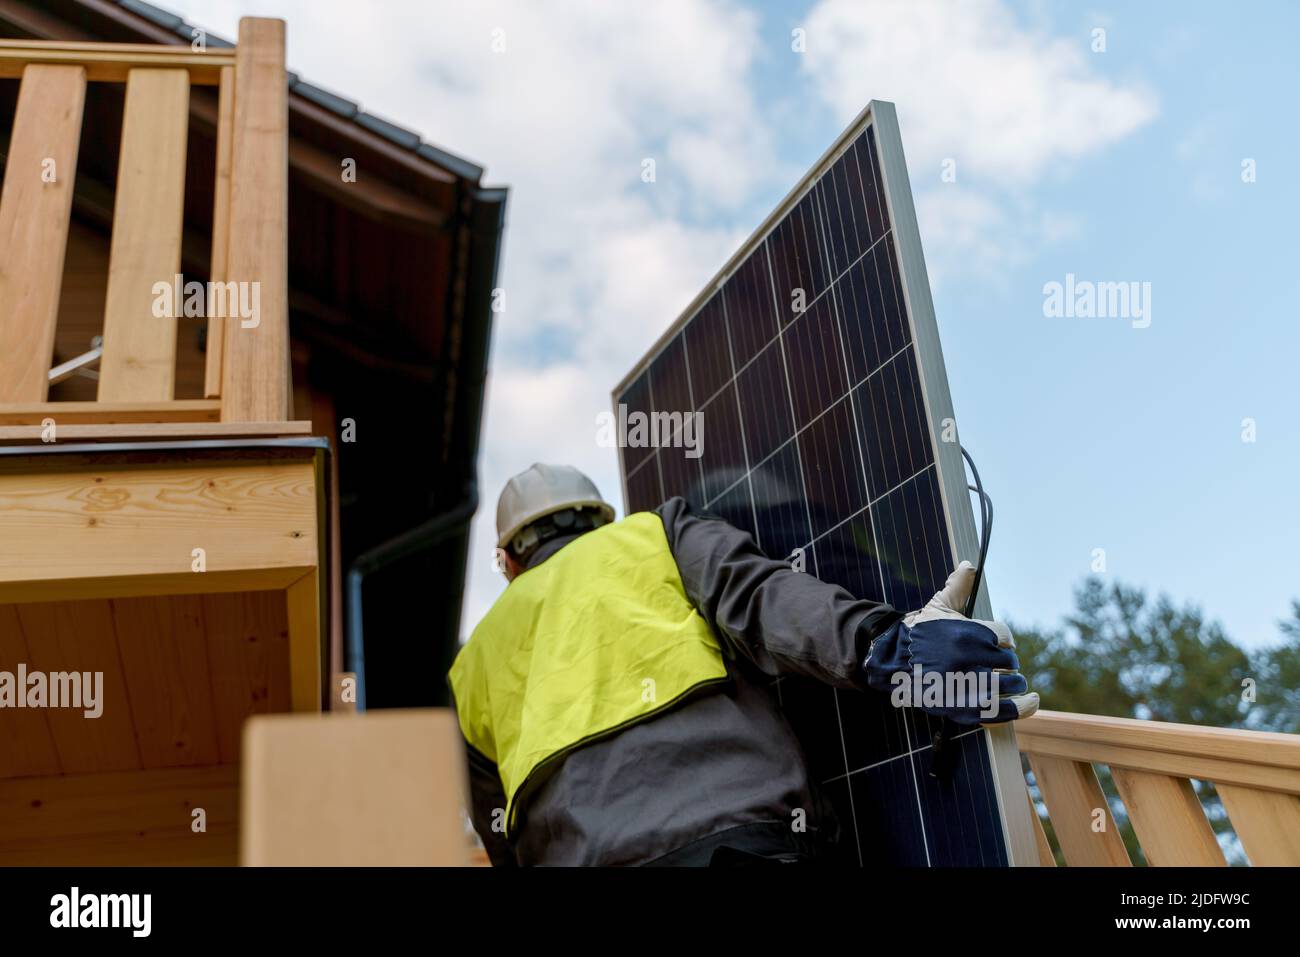 Man worker carrying solar panel for installing solar modul system on house. Stock Photo